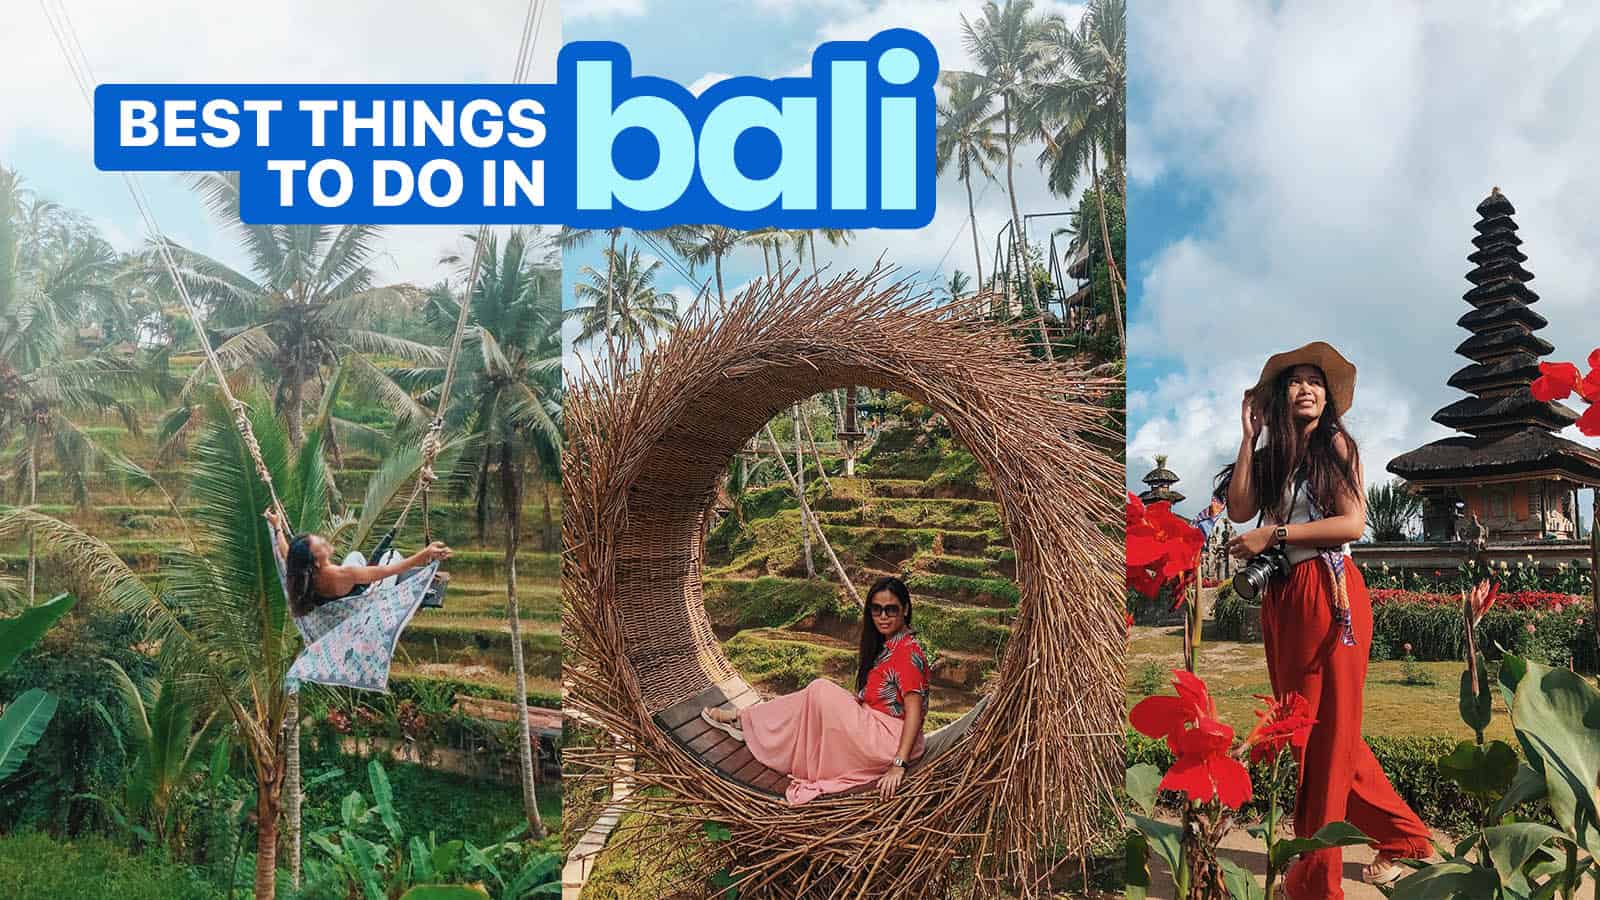 21 BEST THINGS TO DO IN BALI